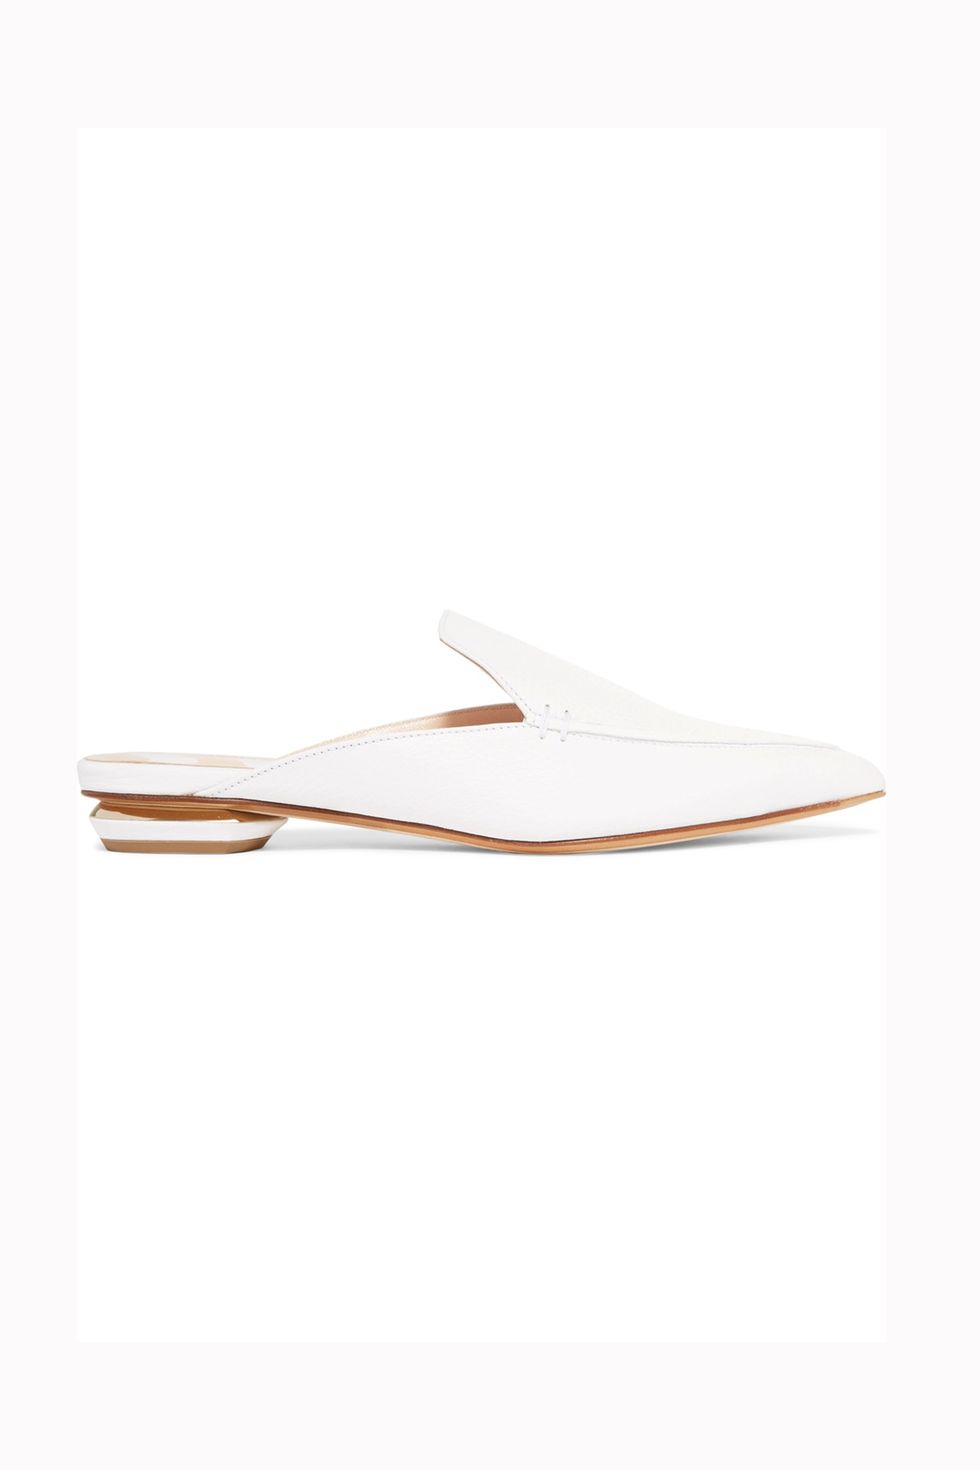 10 chic flat shoes you can wear to the office